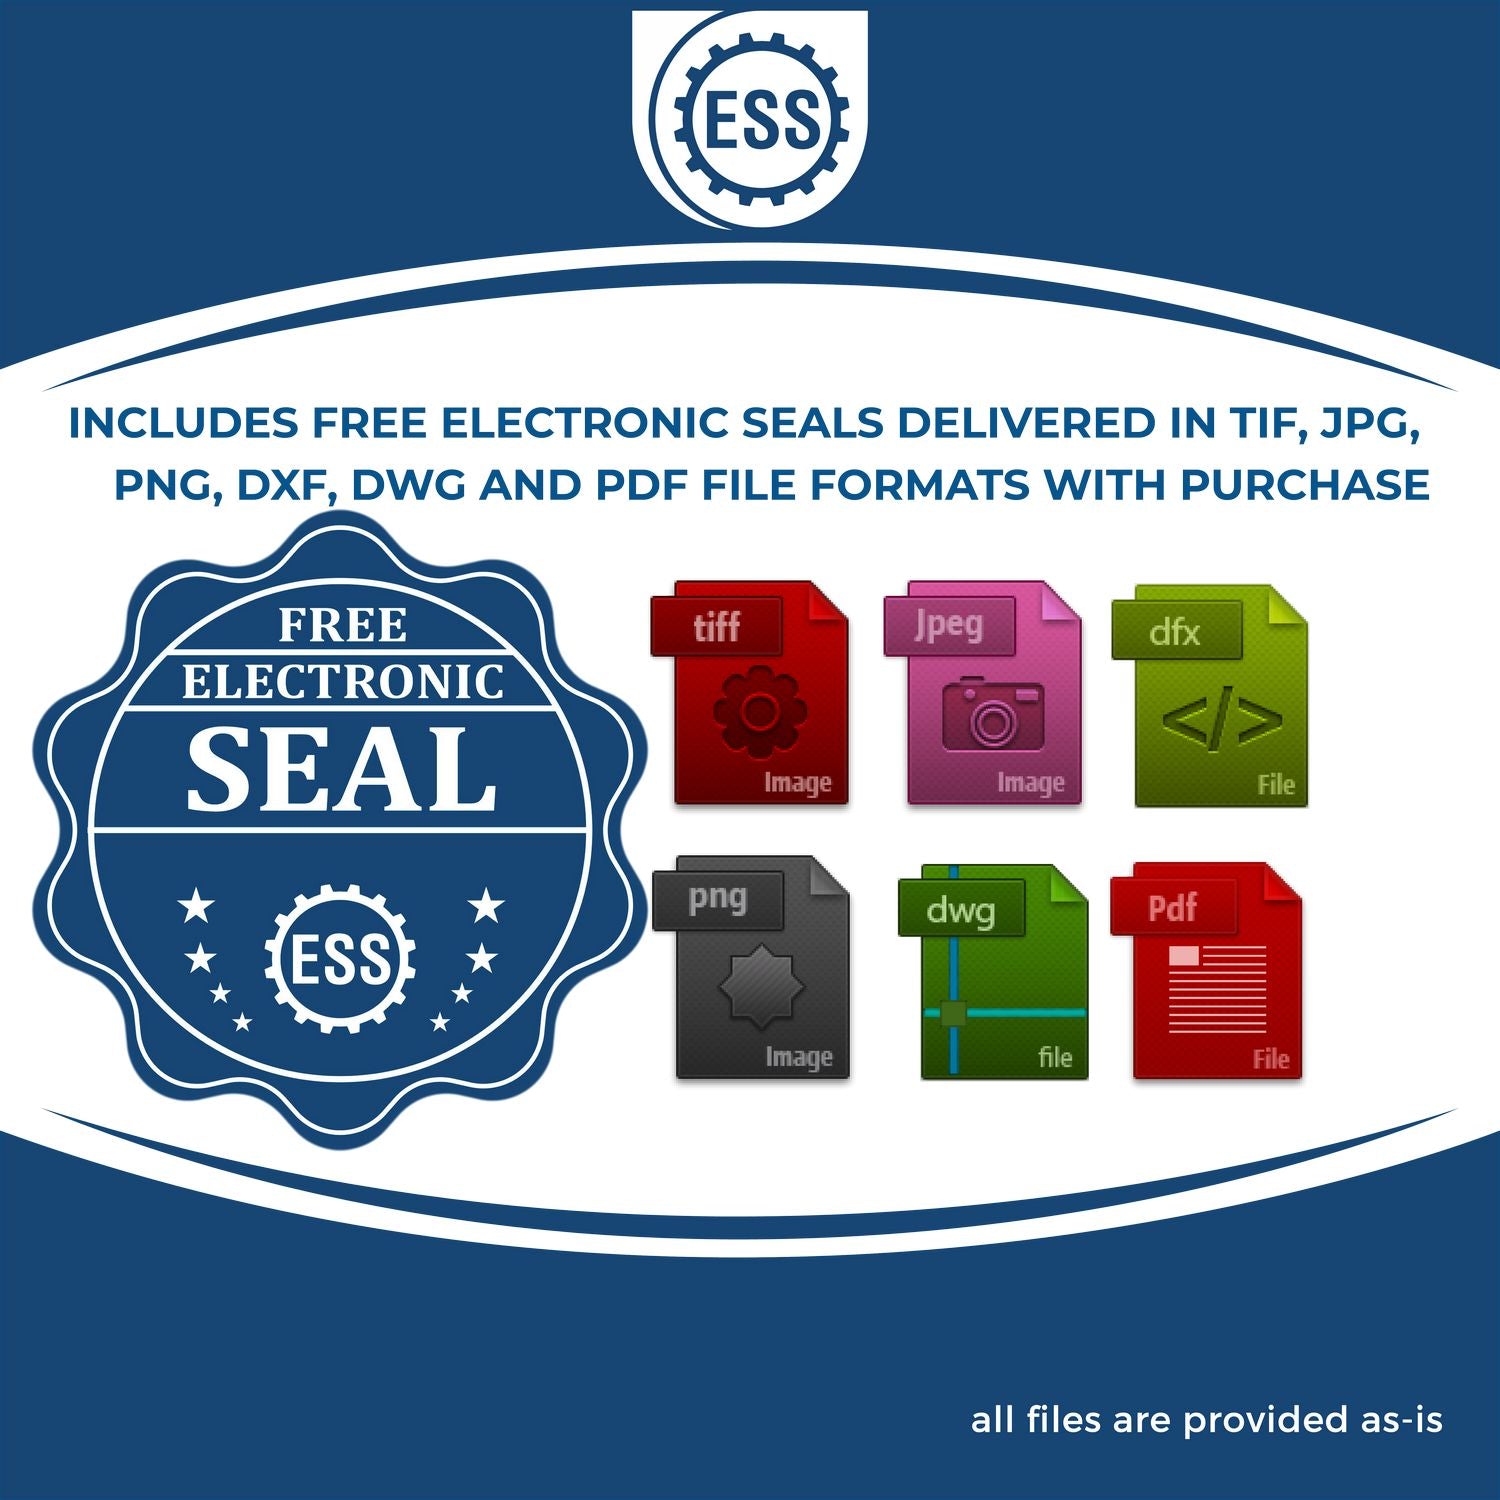 An infographic for the free electronic seal for the Self-Inking Delaware PE Stamp illustrating the different file type icons such as DXF, DWG, TIF, JPG and PNG.